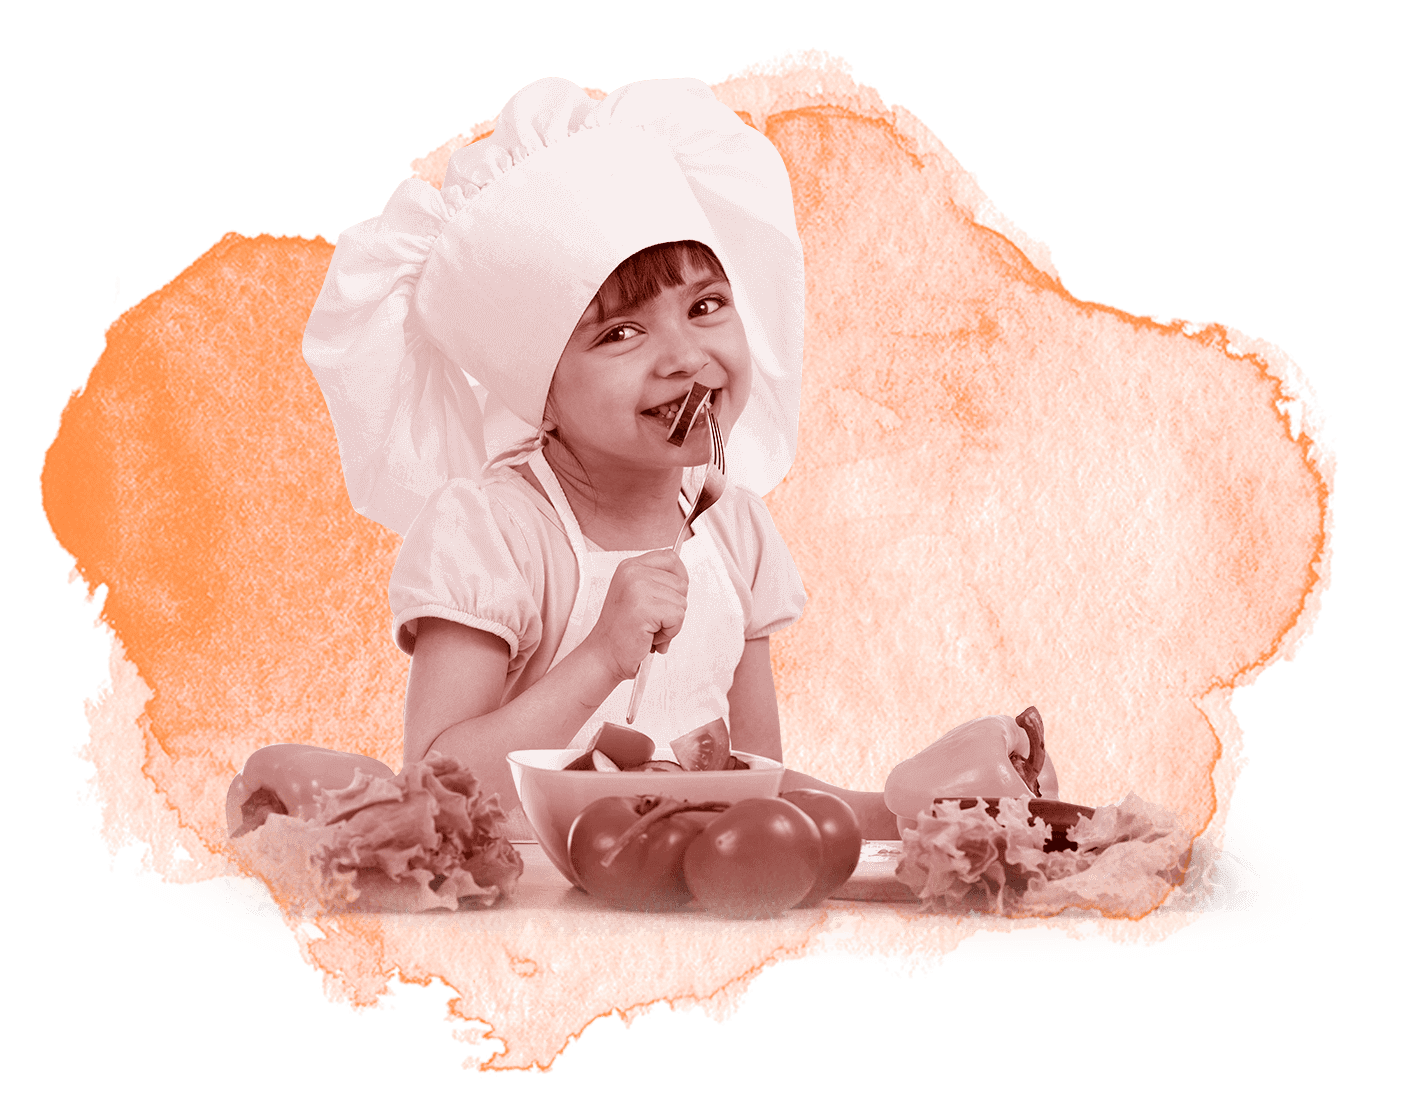 Child with chef hat and food